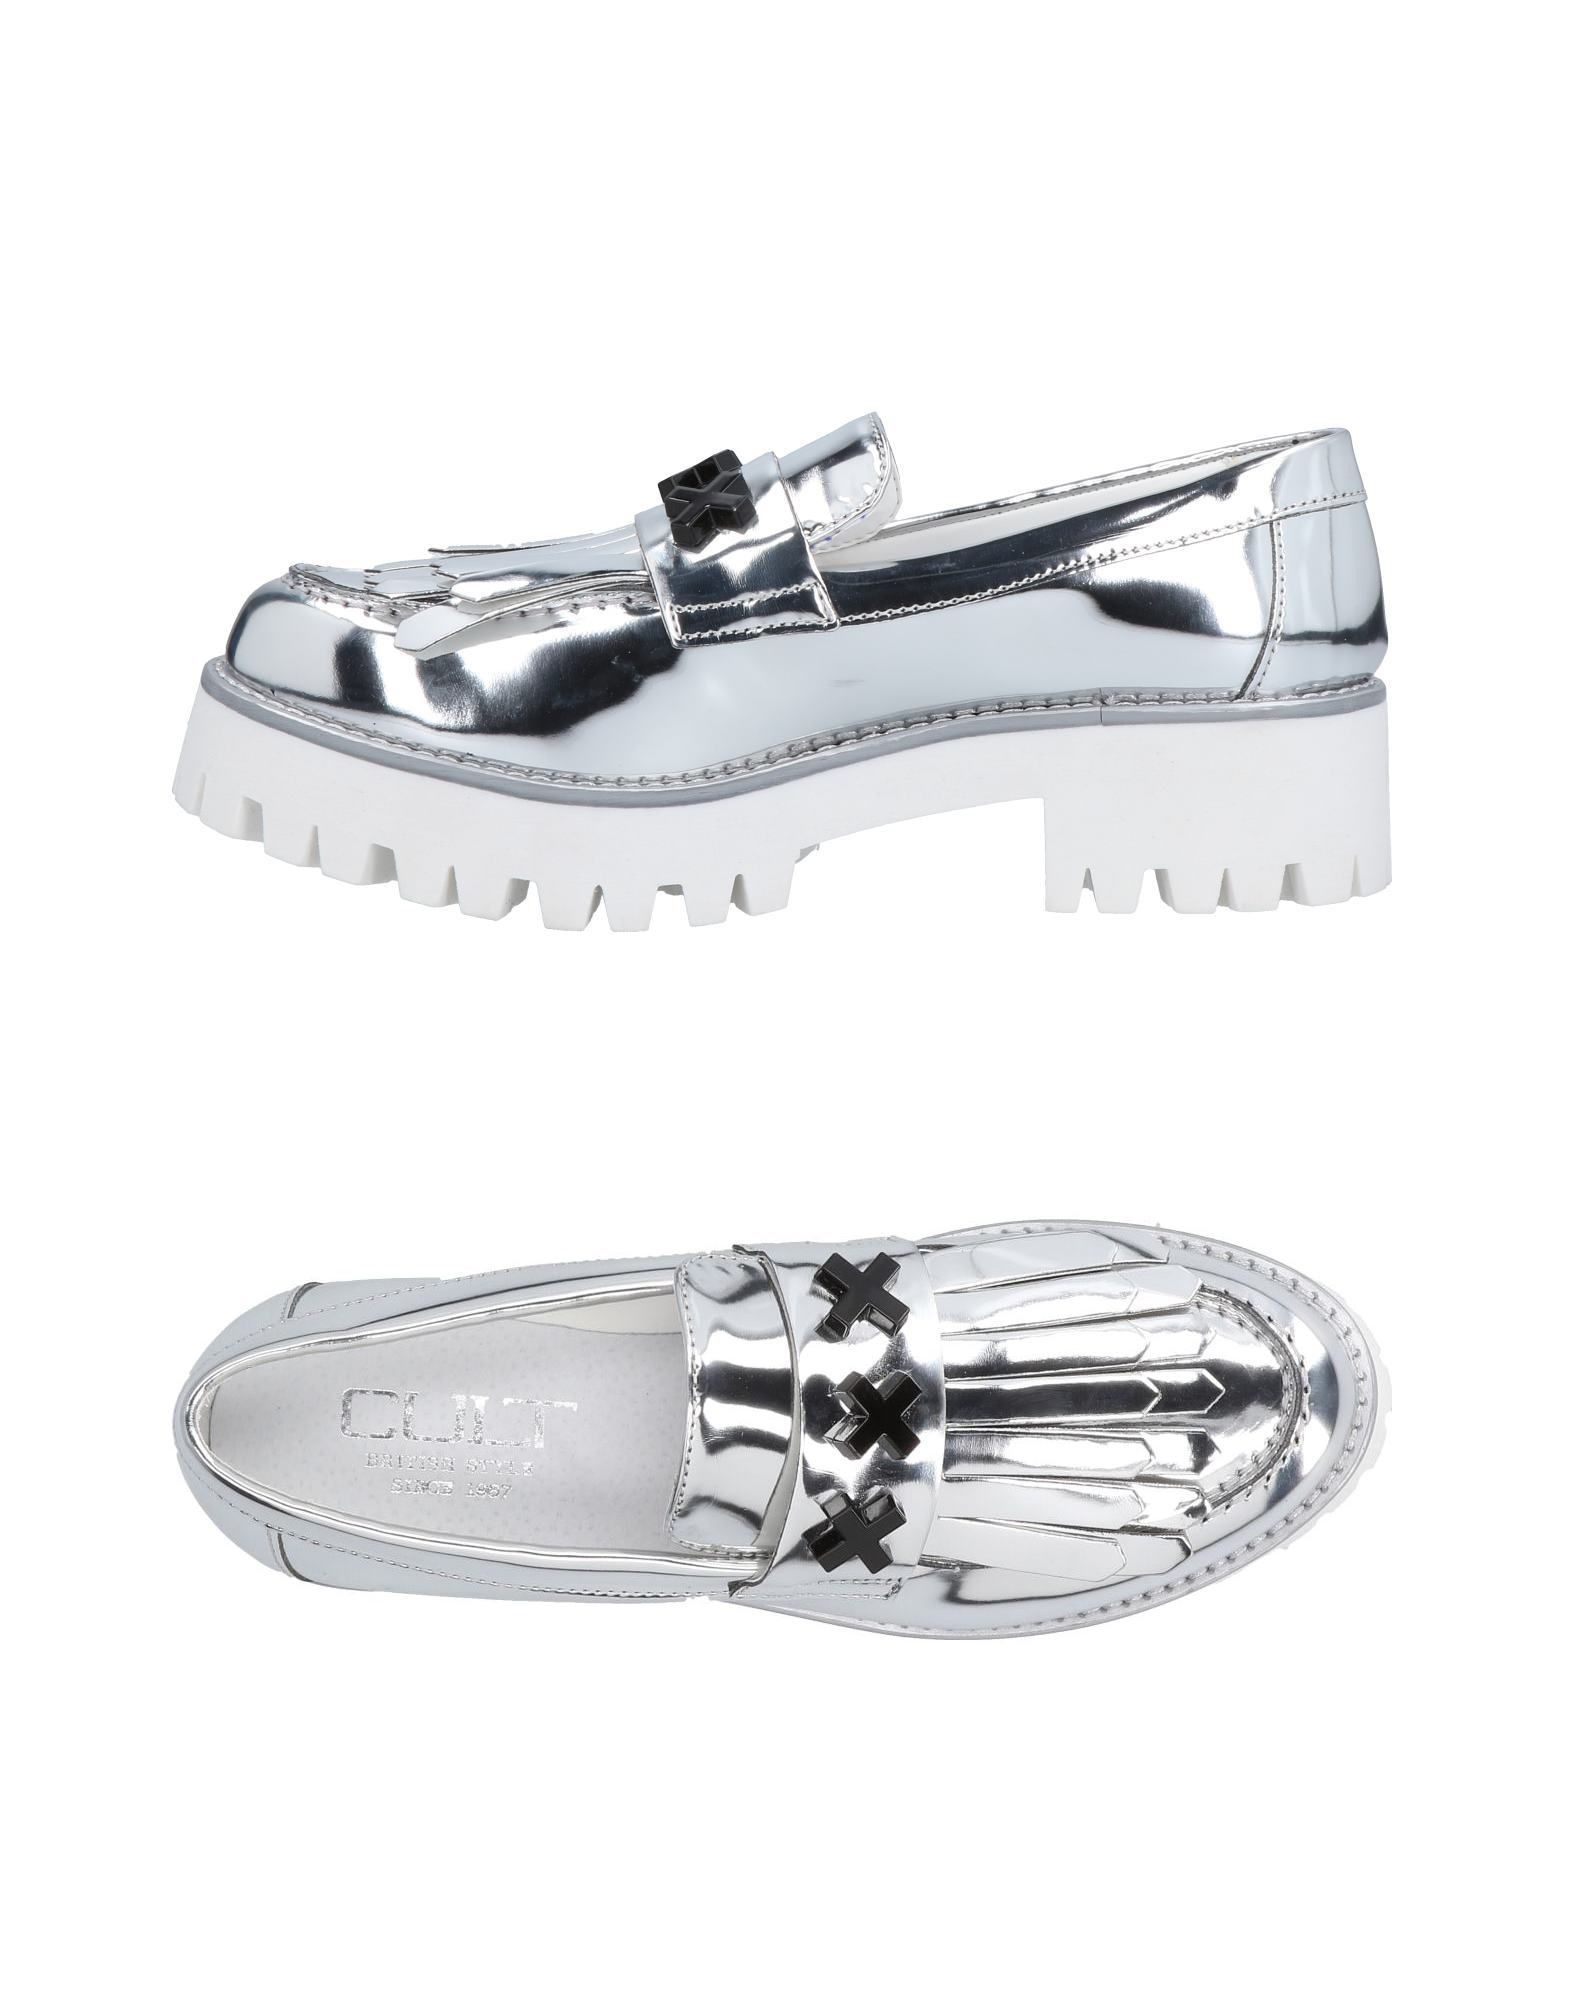 CULT CULT WOMAN LOAFERS SILVER SIZE 9 RUBBER,11473819AR 15